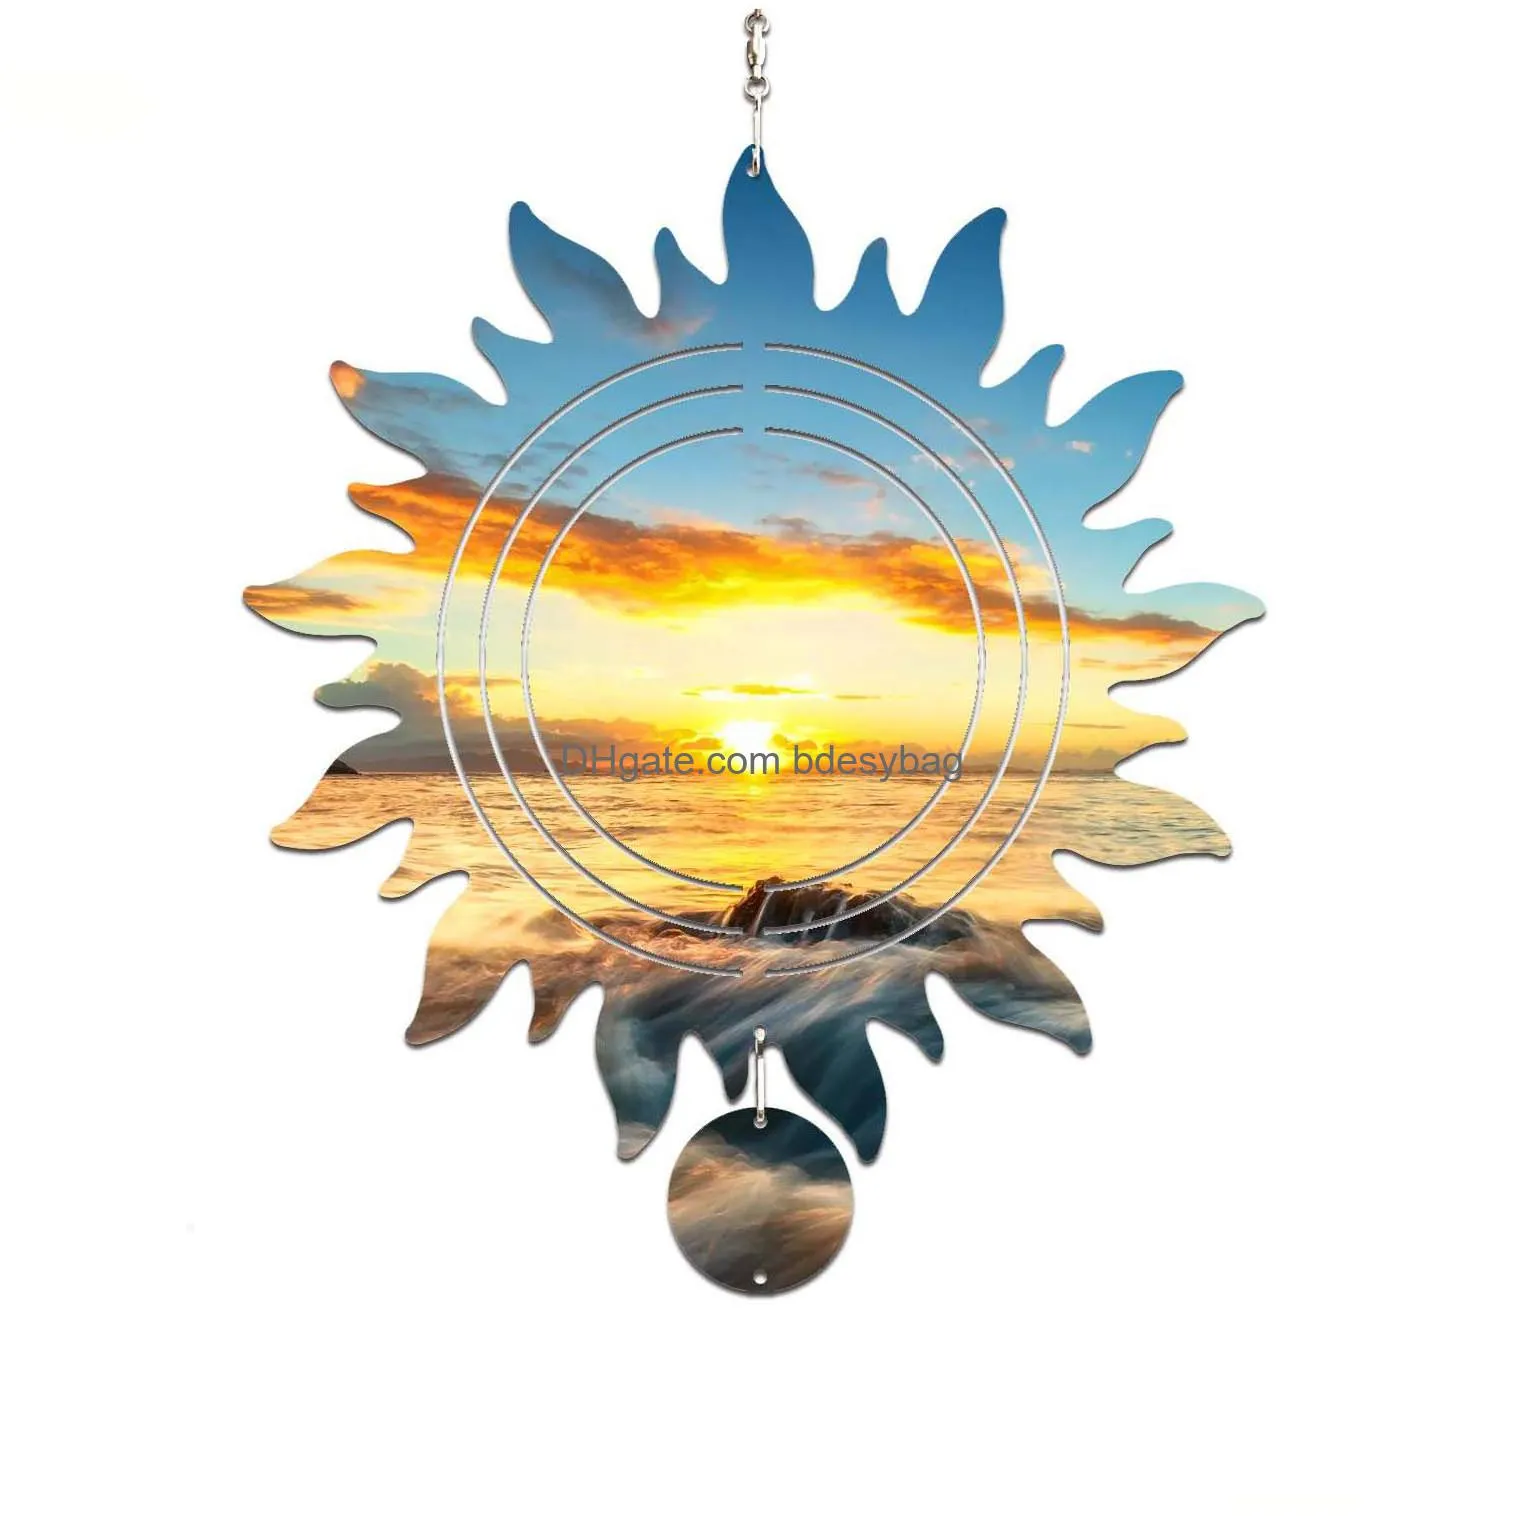 sublimation wind spinner blanks products metal sun shape wind chime sculpture hanging ornament for yard garden decoration